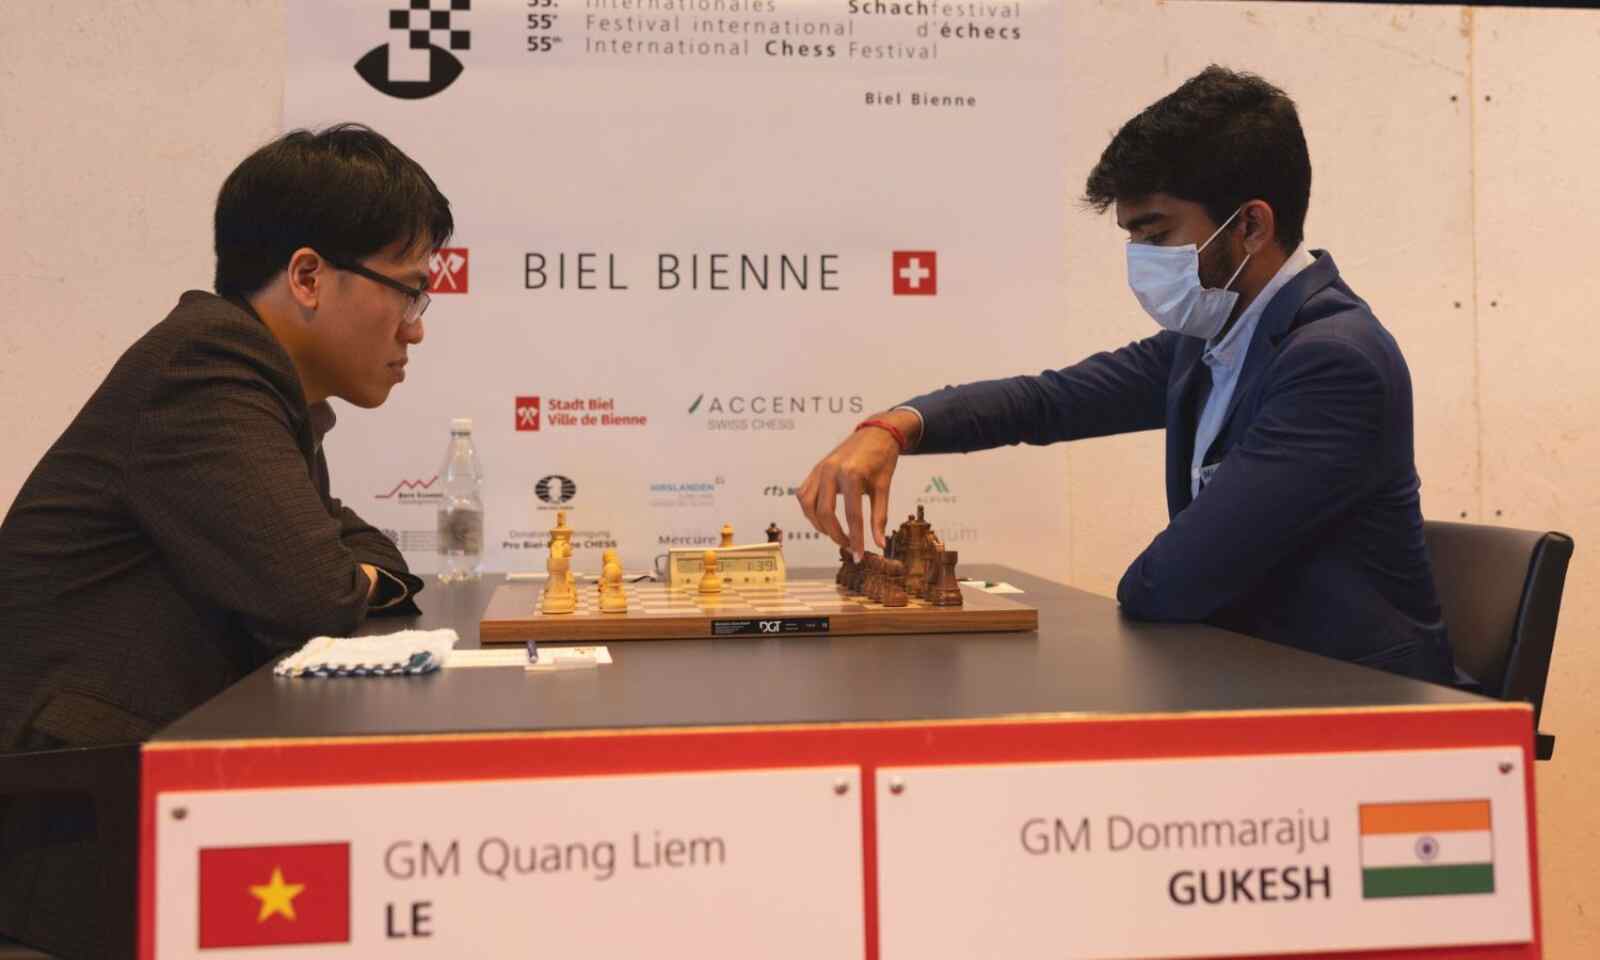 Tamil Nadu Chief Minister heaps praise on D Gukesh for becoming India's top- rated chess player in live ratings